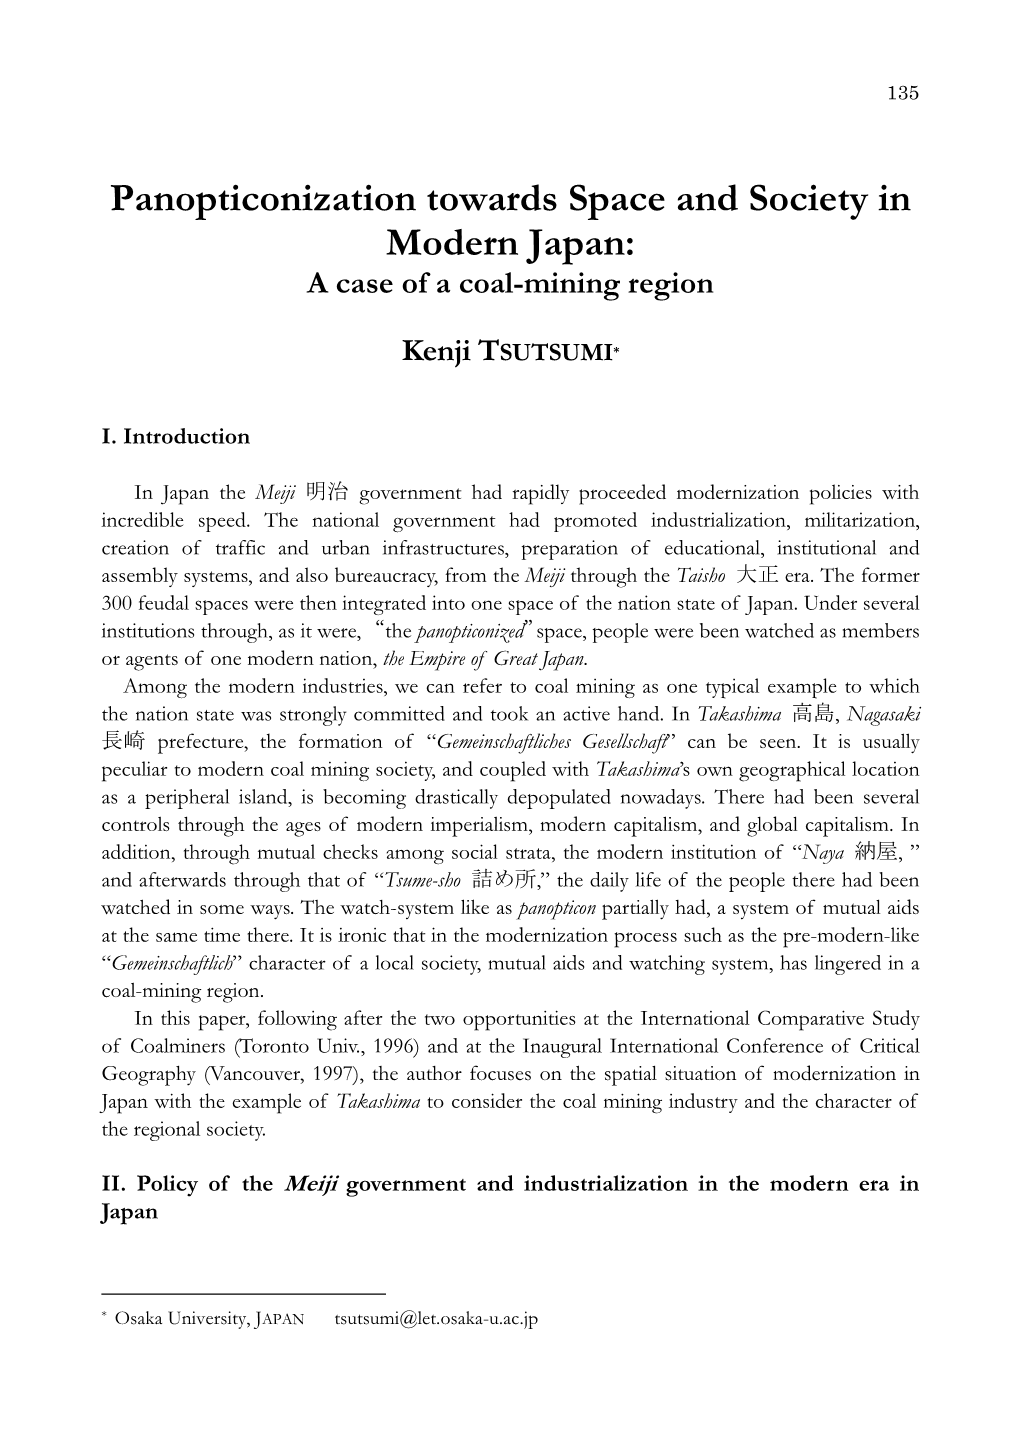 Panopticonization Towards Space and Society in Modern Japan: a Case of a Coal-Mining Region